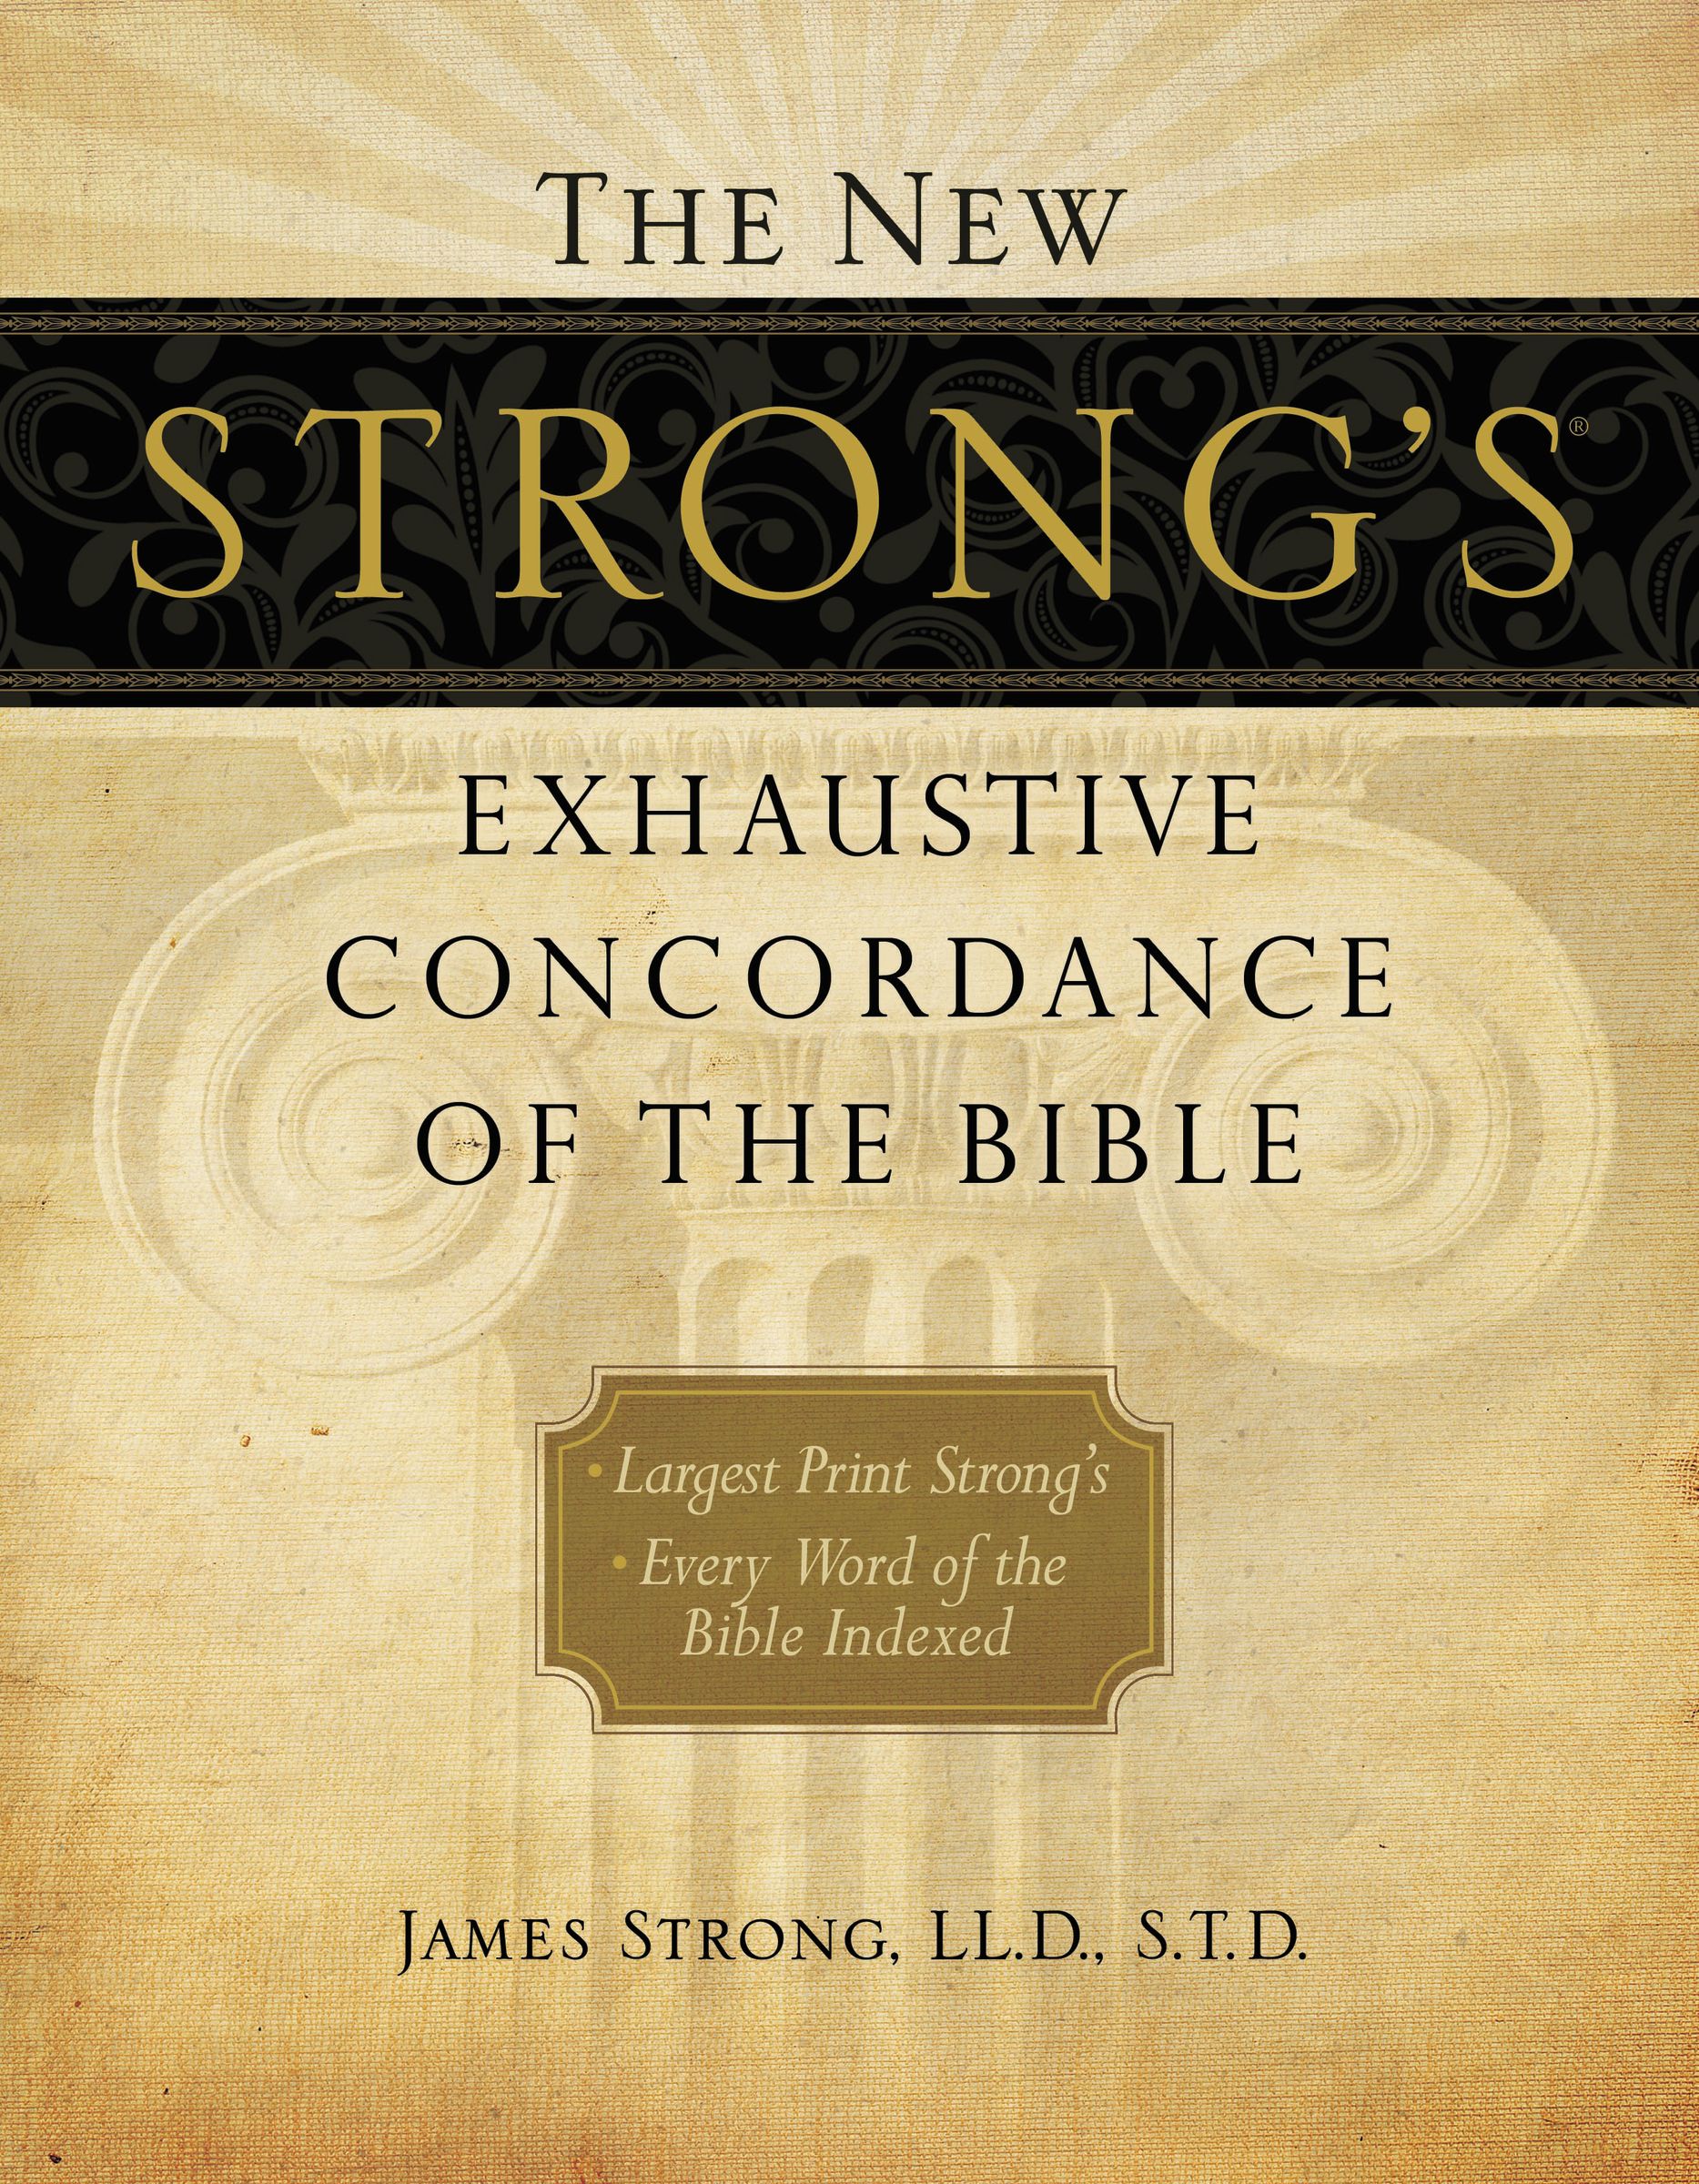 Image of The New Strong's Exhaustive Concordance of the Bible other